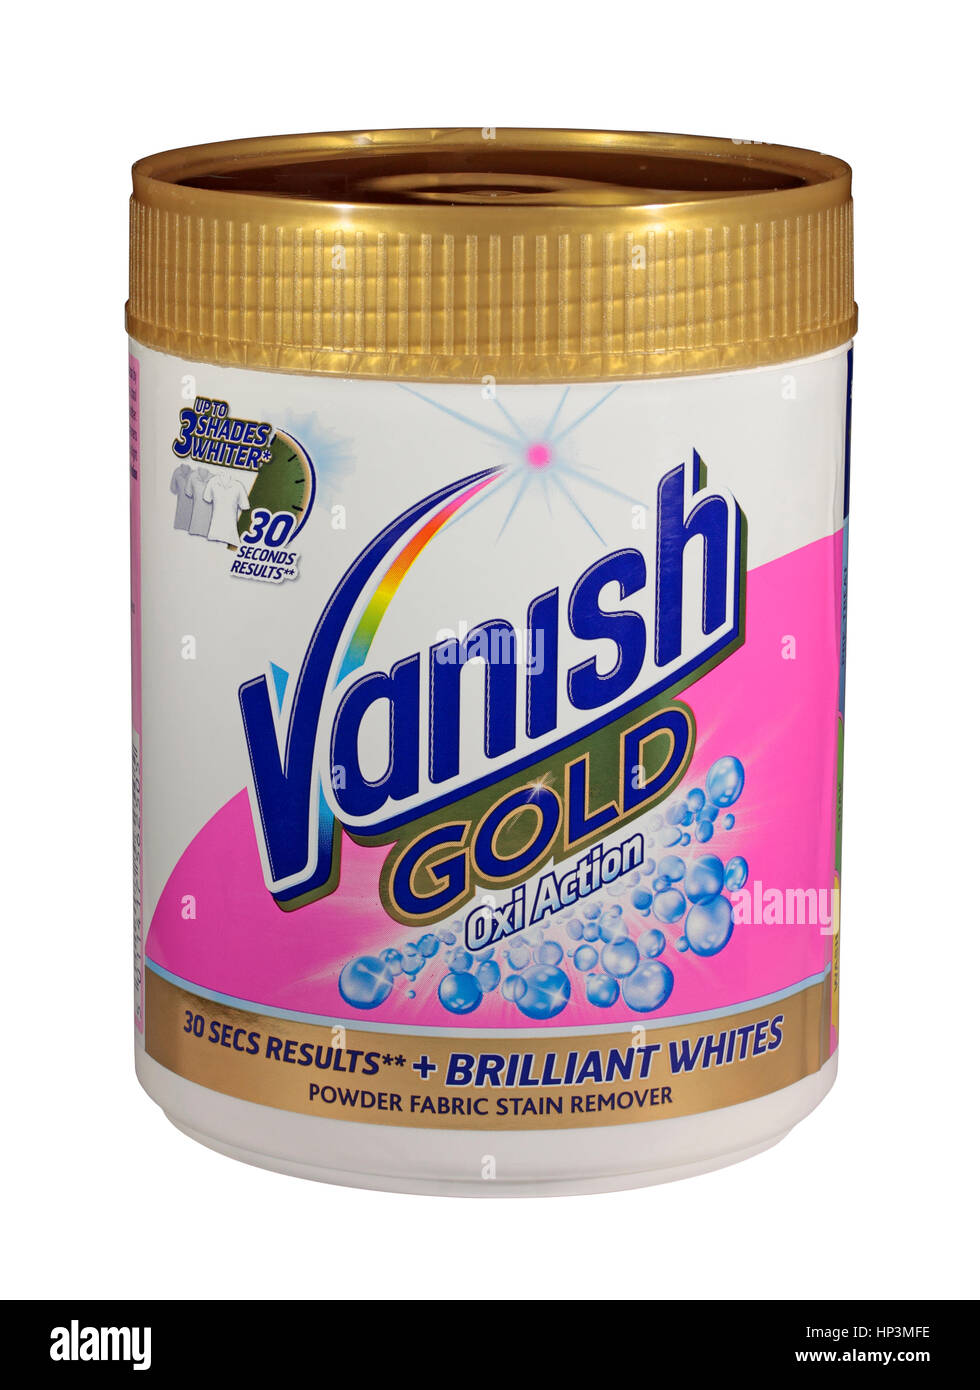 A Tub of Vanish Gold Oxi Action Powder fabric Stain Remover Isolated on a white background Stock Photo